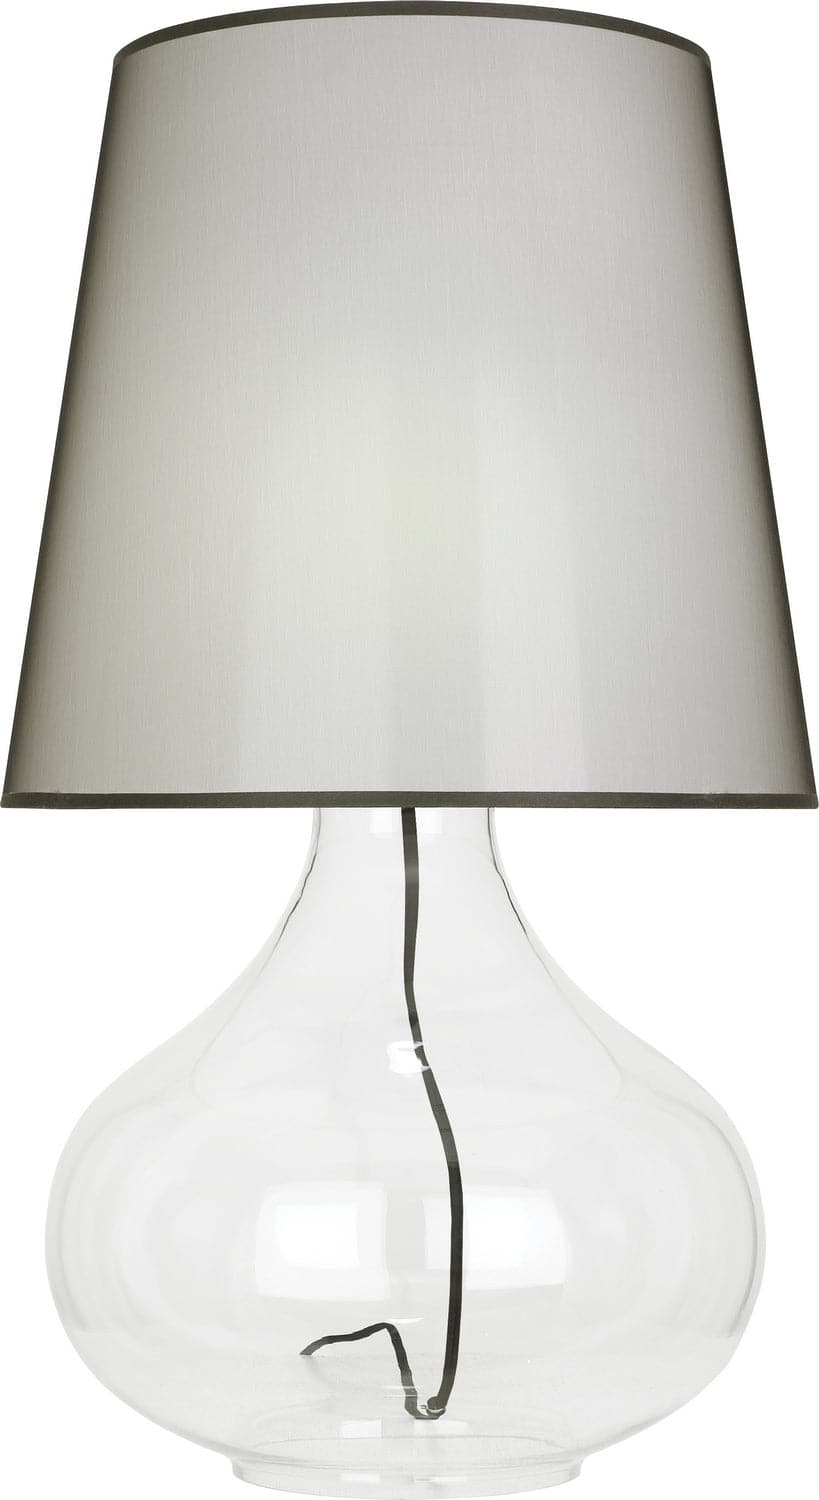 Robert Abbey - 459B - One Light Table Lamp - June - Clear Glass Body w/Black Fabric Wrapped Cord